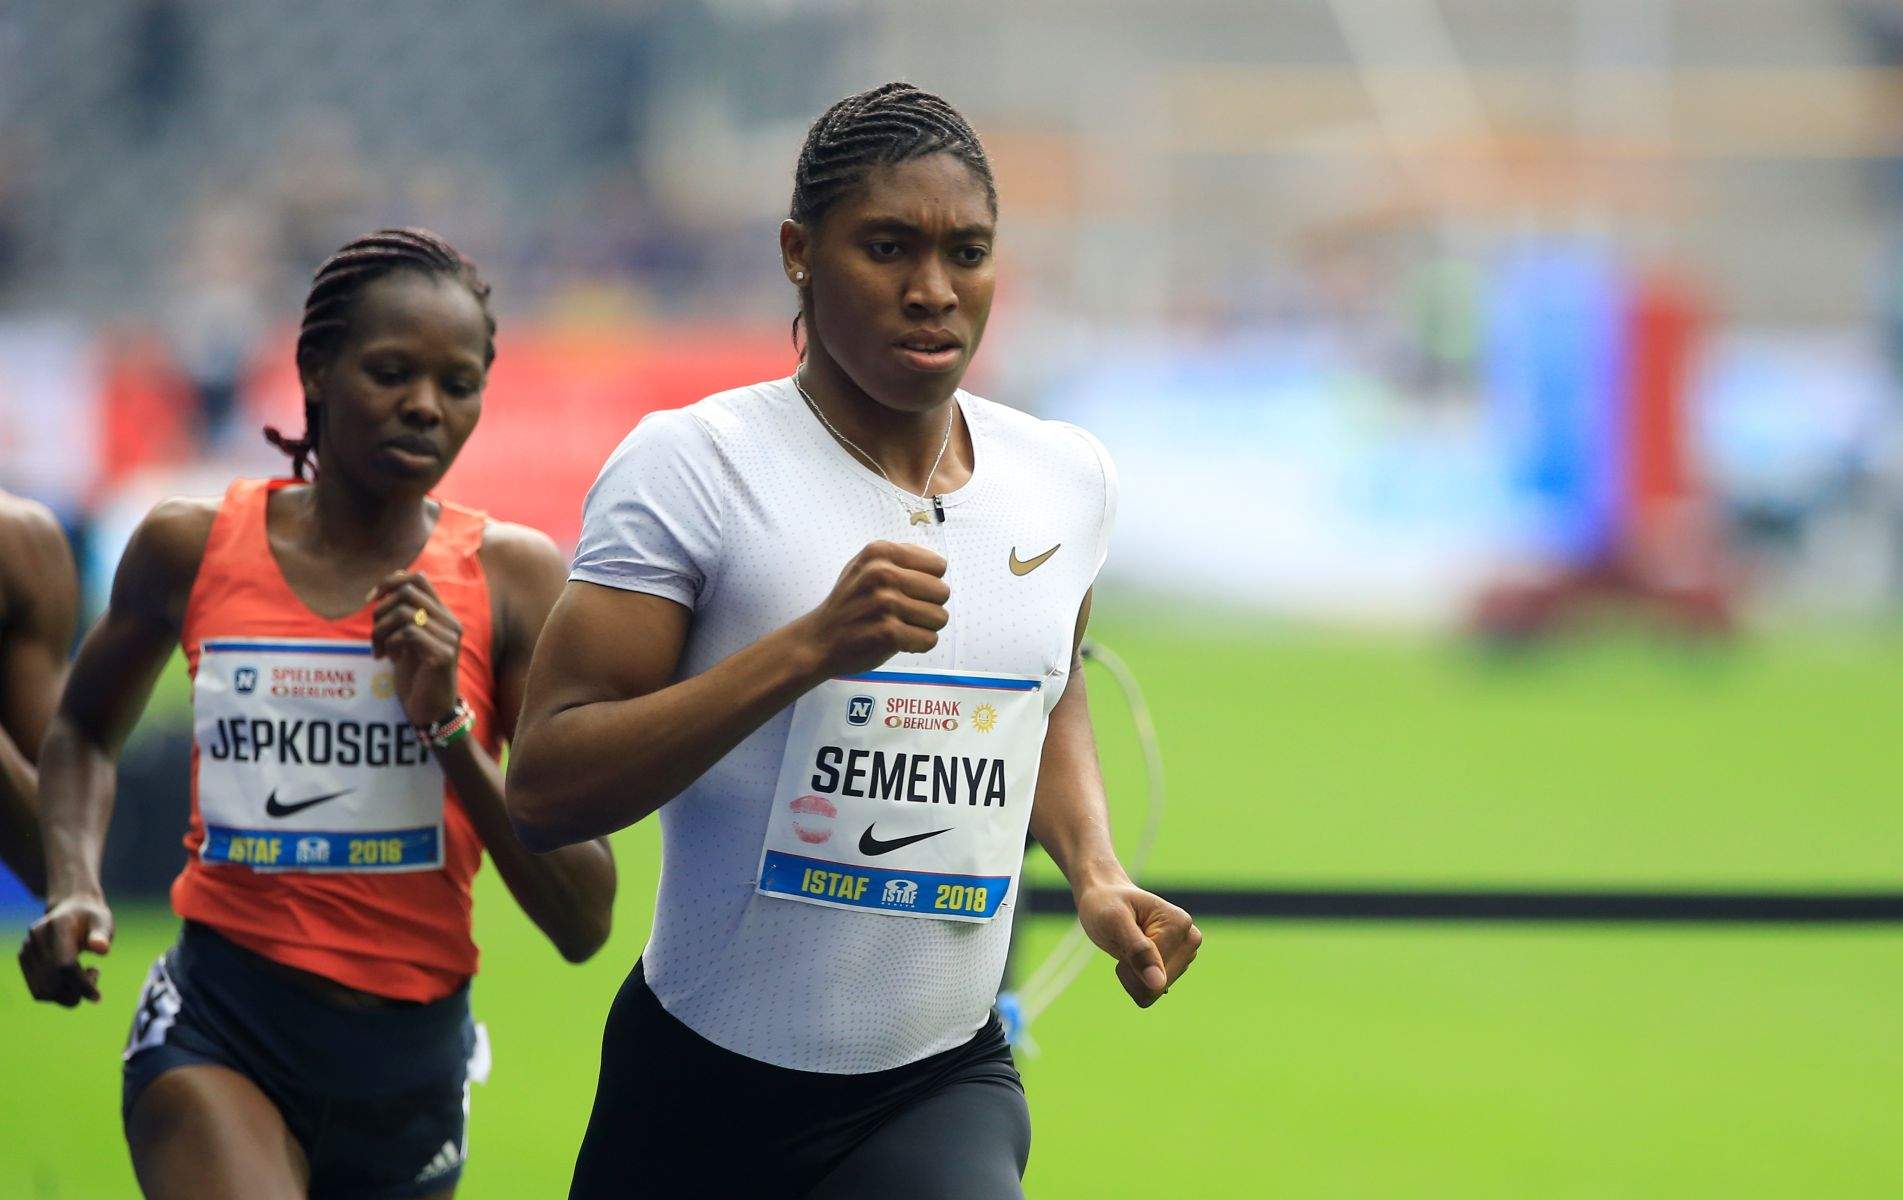 BERLIN, GERMANY - SEPTEMBER 02: Caster Semenya (front) finishes first in Women's 1000 Metres during the ISTAF 2018 athletics meeting at Olympiastadion on September 2, 2018 in Berlin, Germany. Abdulhamid Hosbas / Anadolu Agency BERLIN LEKKOATLETYKA FOT. ABACA/NEWSPIX.PL POLAND ONLY! --- Newspix.pl *** Local Caption *** www.newspix.pl mail us: info@newspix.pl call us: 0048 022 23 22 222 --- Polish Picture Agency by Ringier Axel Springer Poland